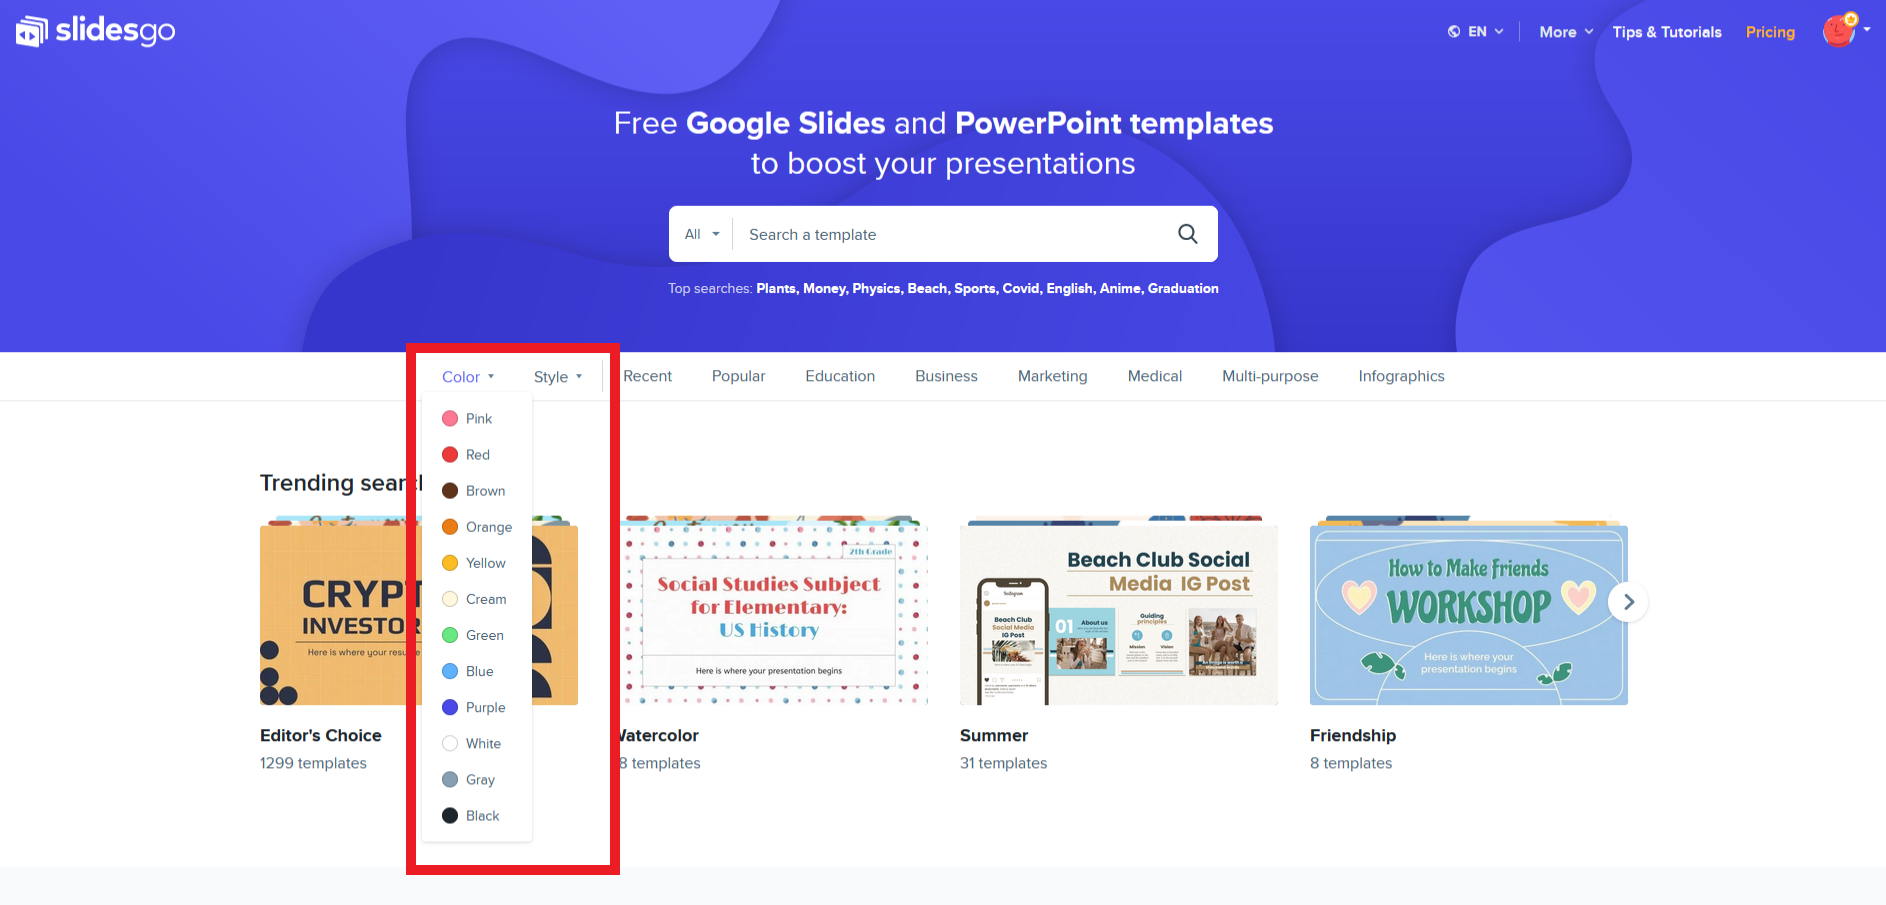 Directions of How to Acquire Additional New Google Slides Themes in slidesgo